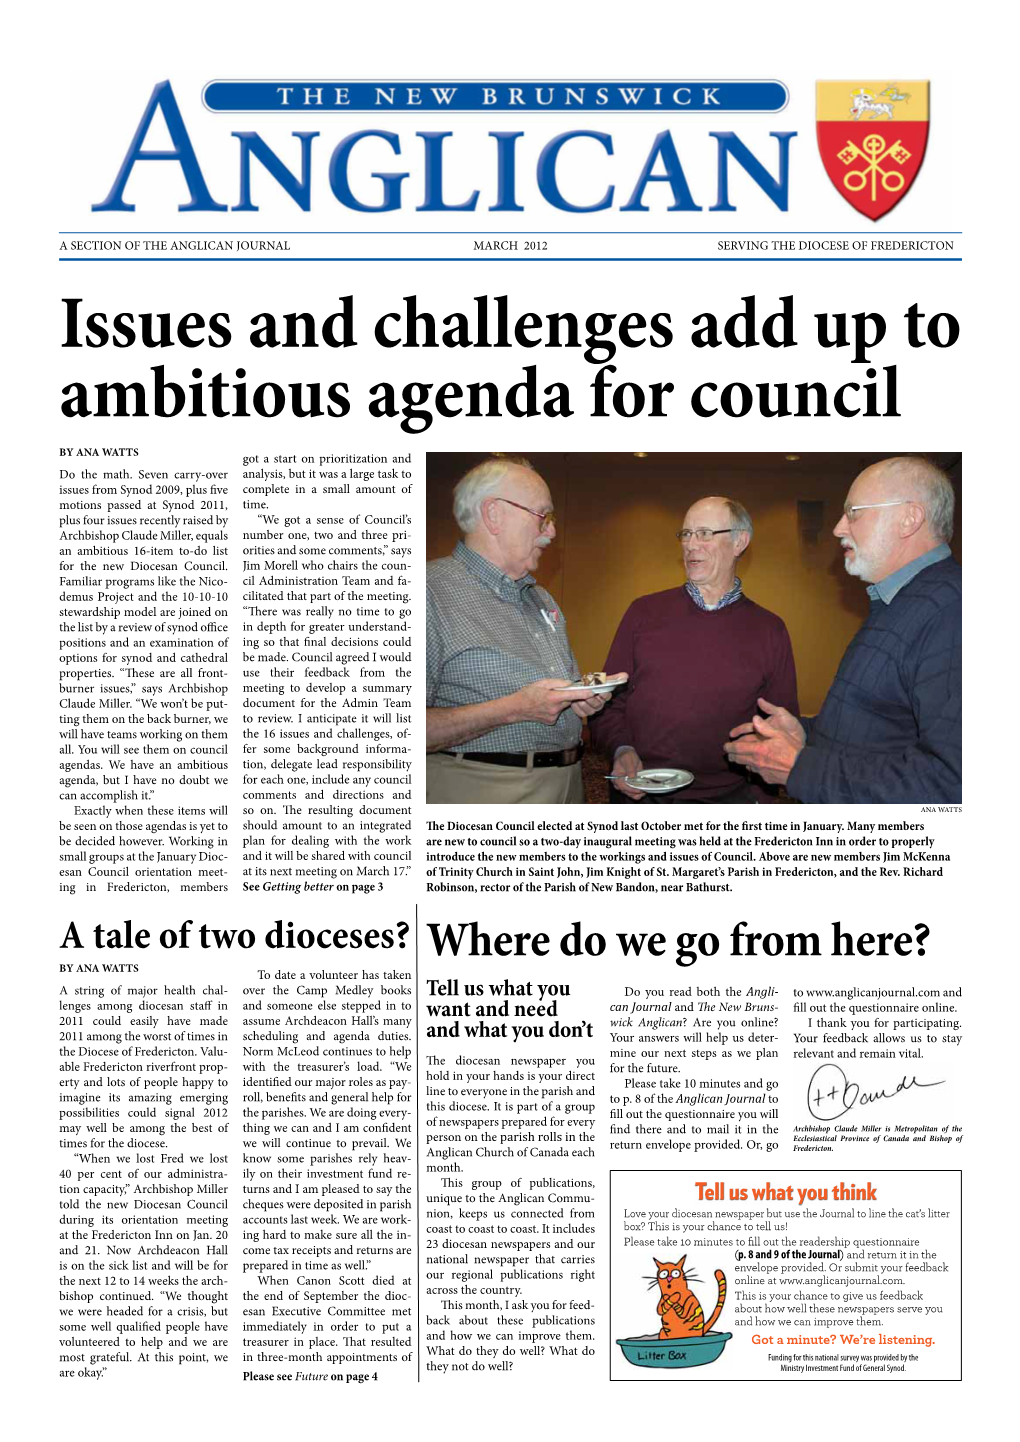 Issues and Challenges Add up to Ambitious Agenda for Council